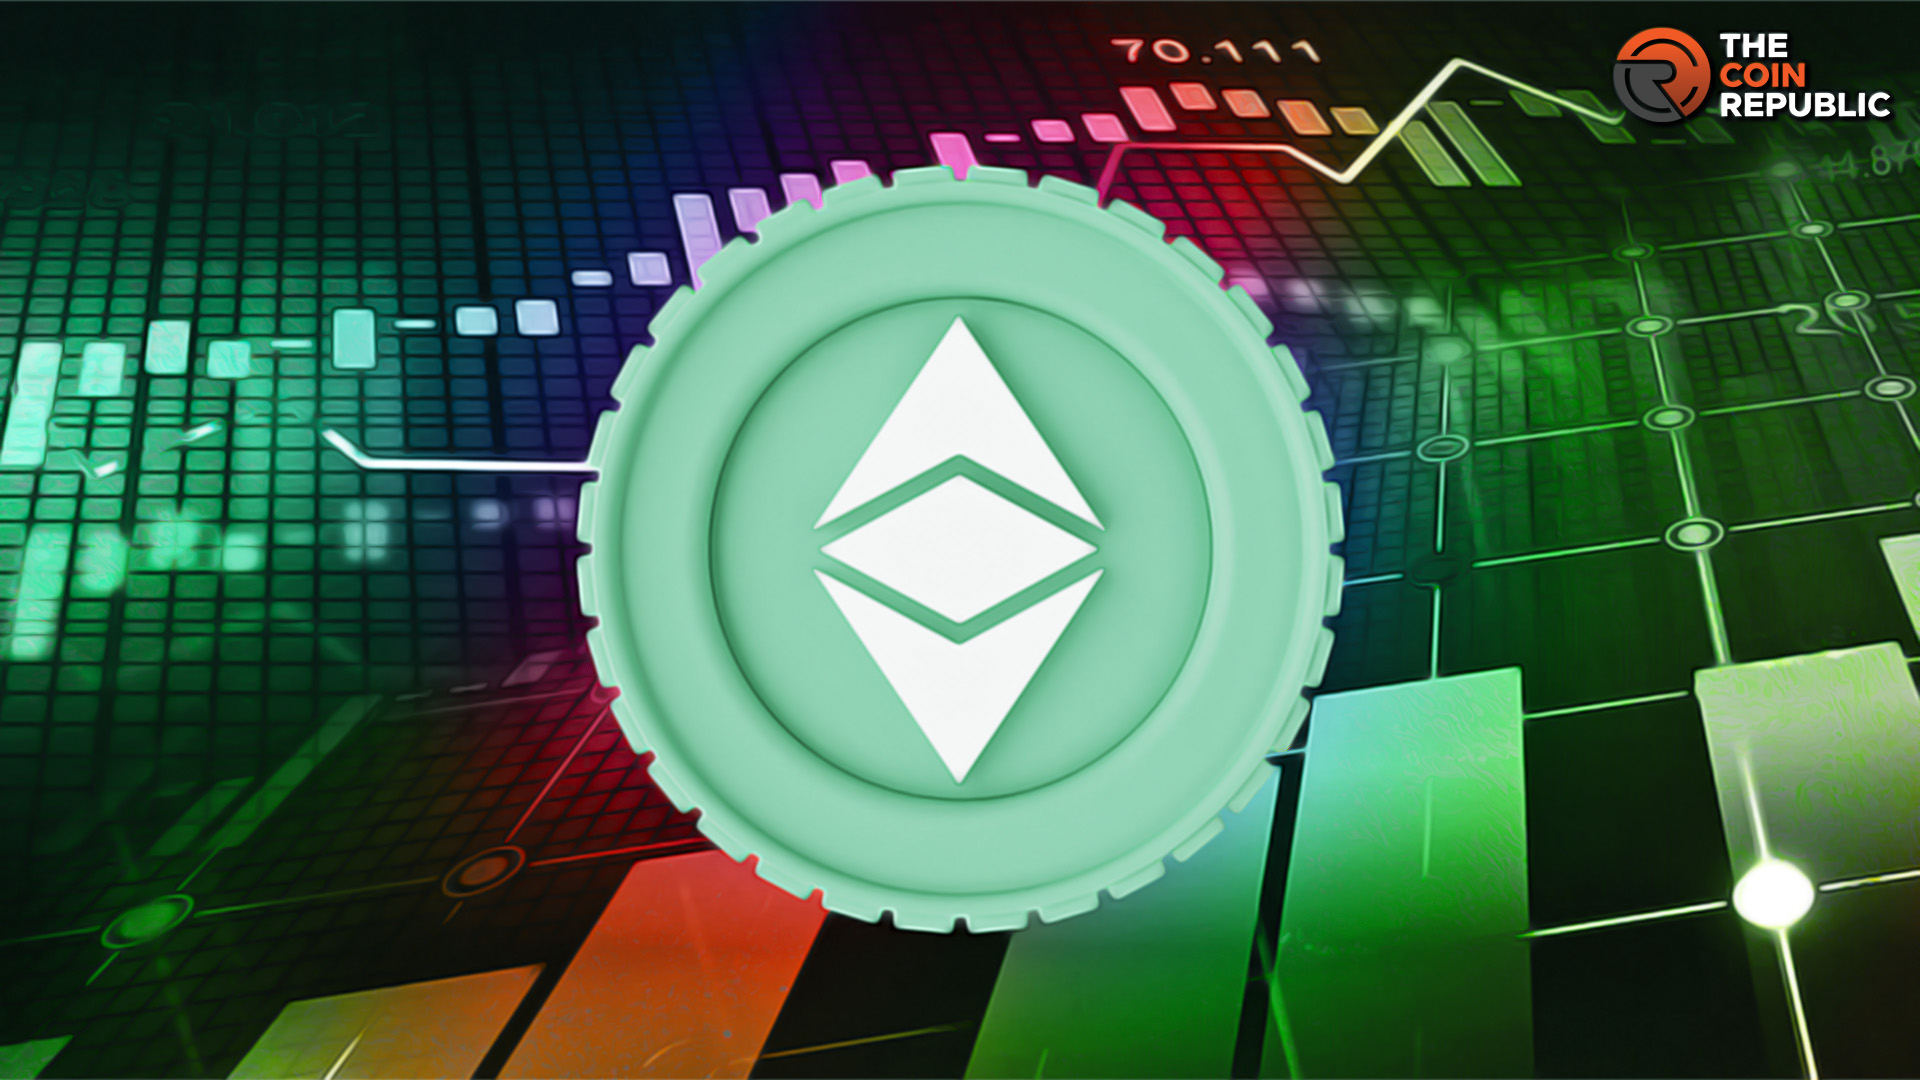 ETC Price Forecast 2023: Will ETC Price Keep Falling Or Rise?